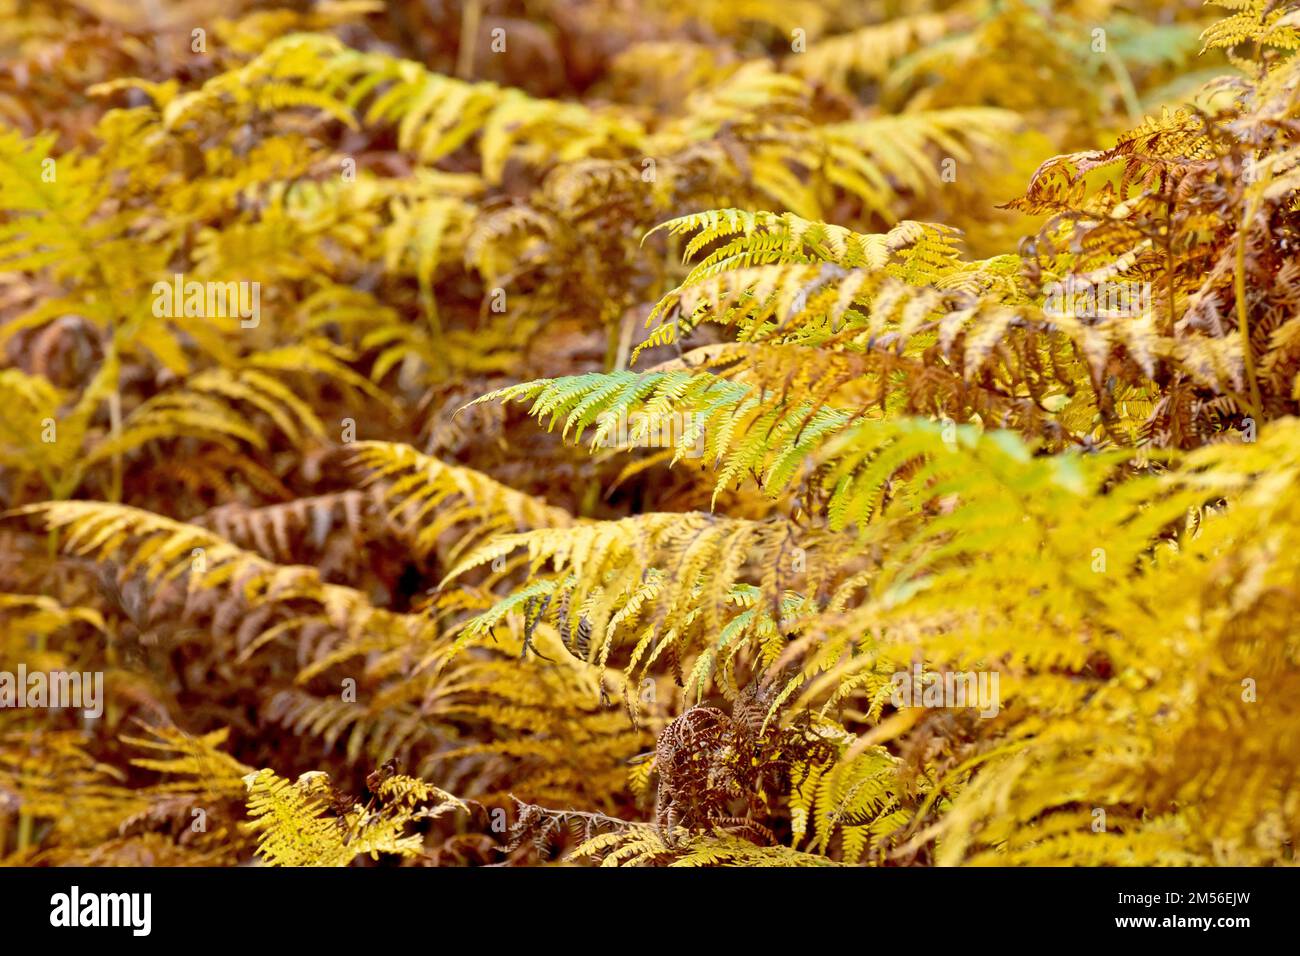 Bracken (pteridium aquilinum), close up of the common deciduous fern in its yellow and brown autumn colours. Stock Photo